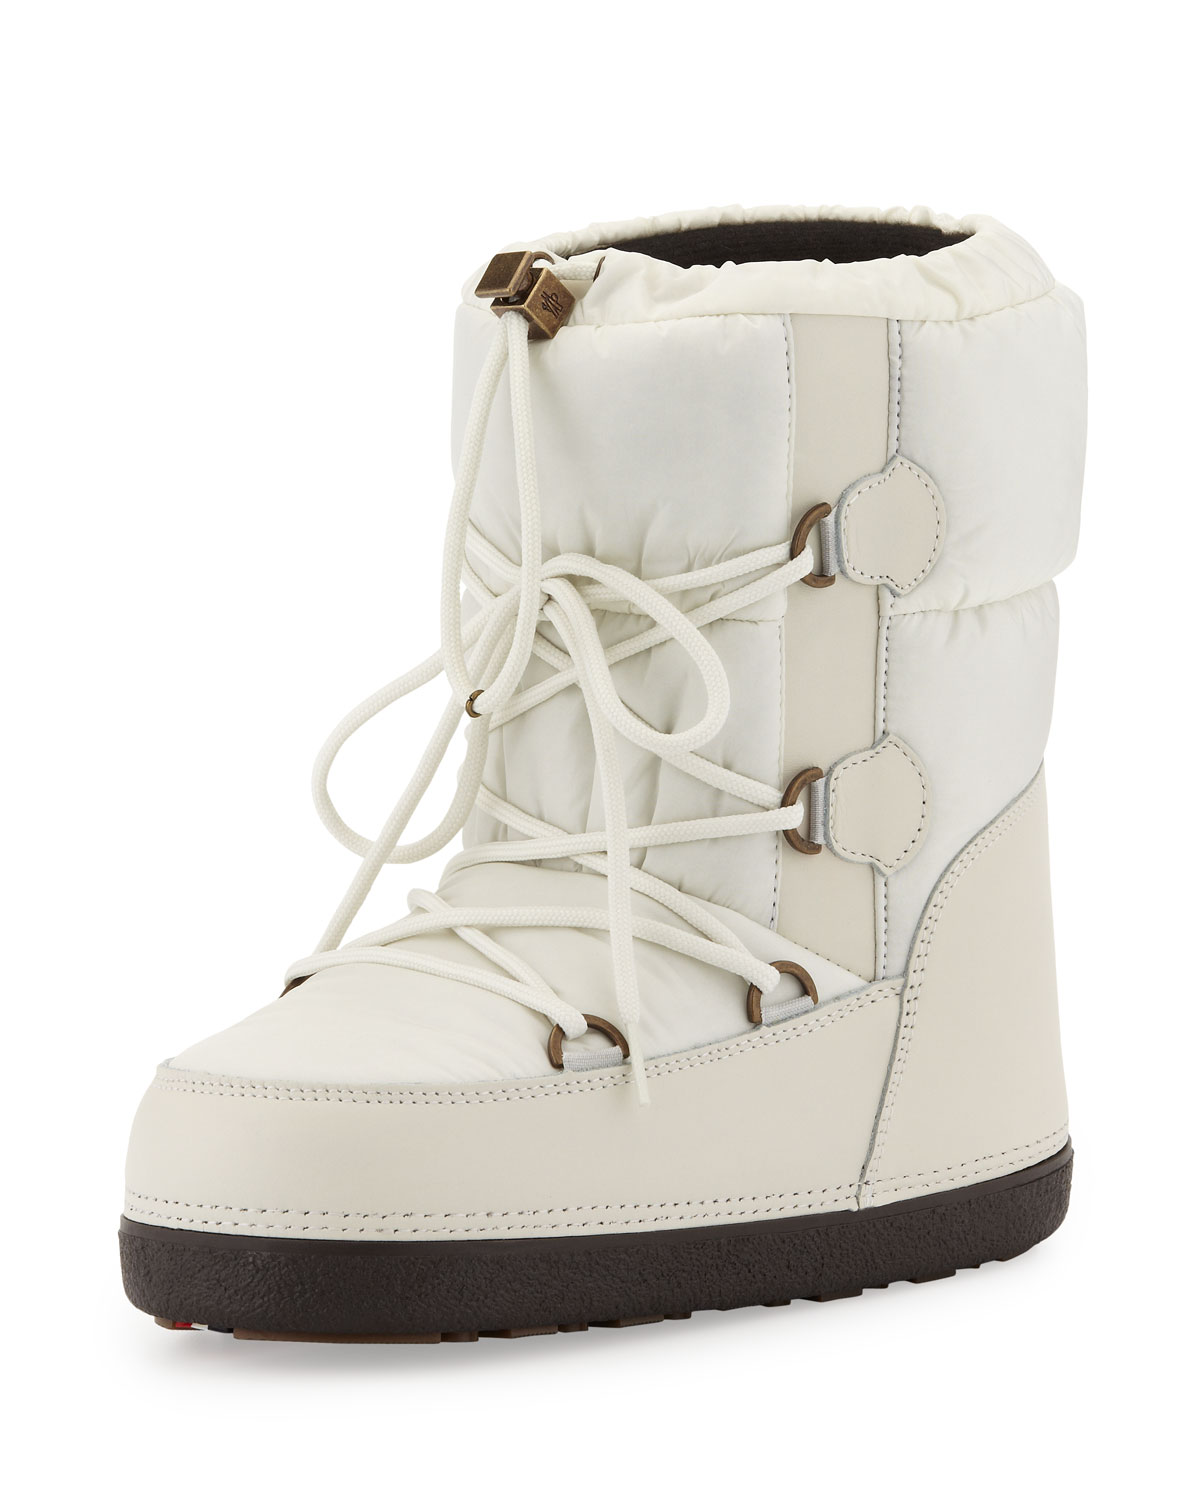 Moncler Short Quilted Snow Boot Cream 